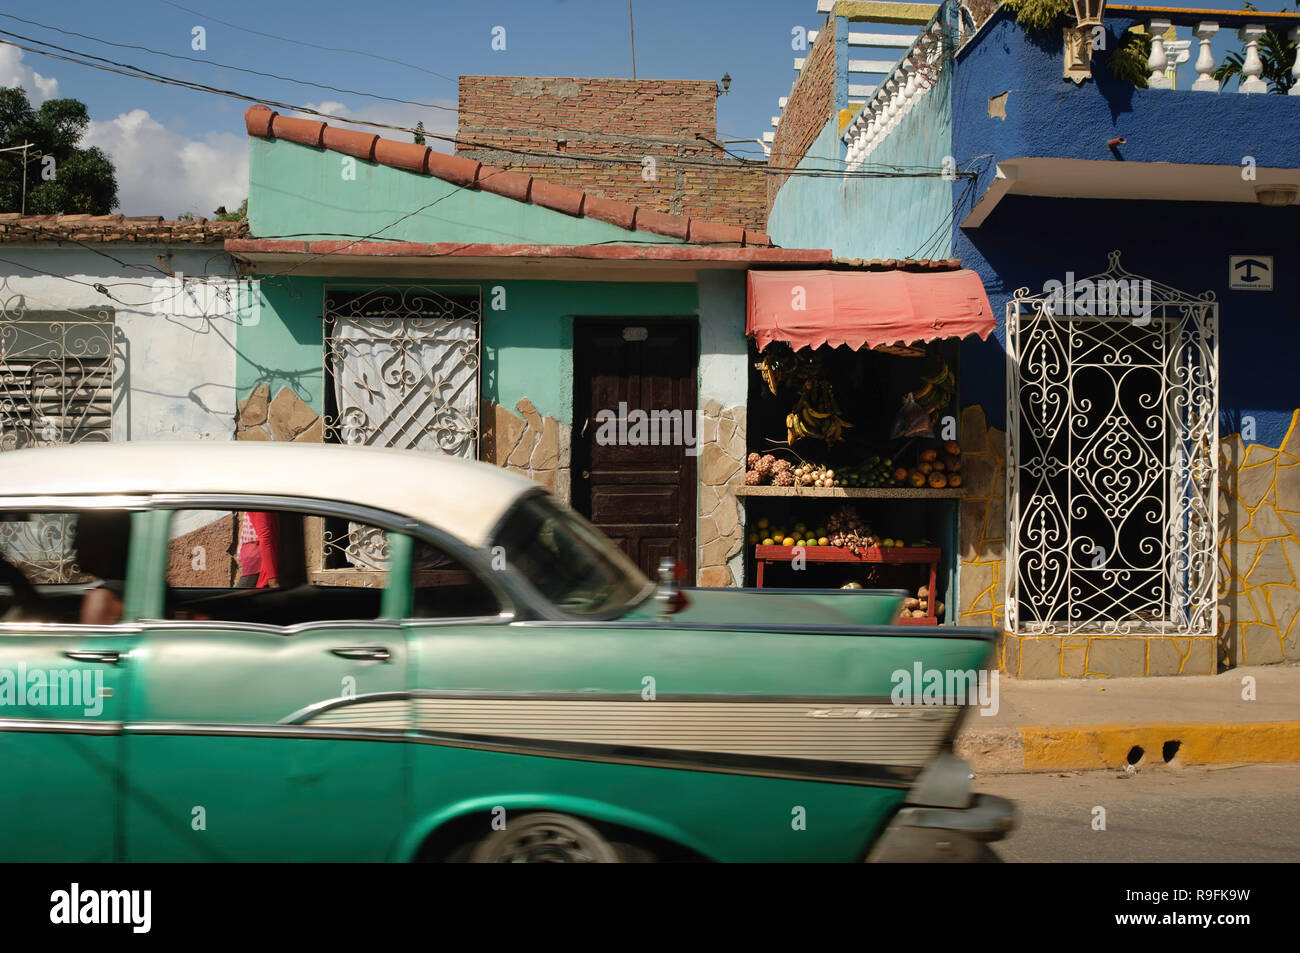 A classic American green car in front of a typical fruit store on the streets of Trinidad, Cuba. Stock Photo